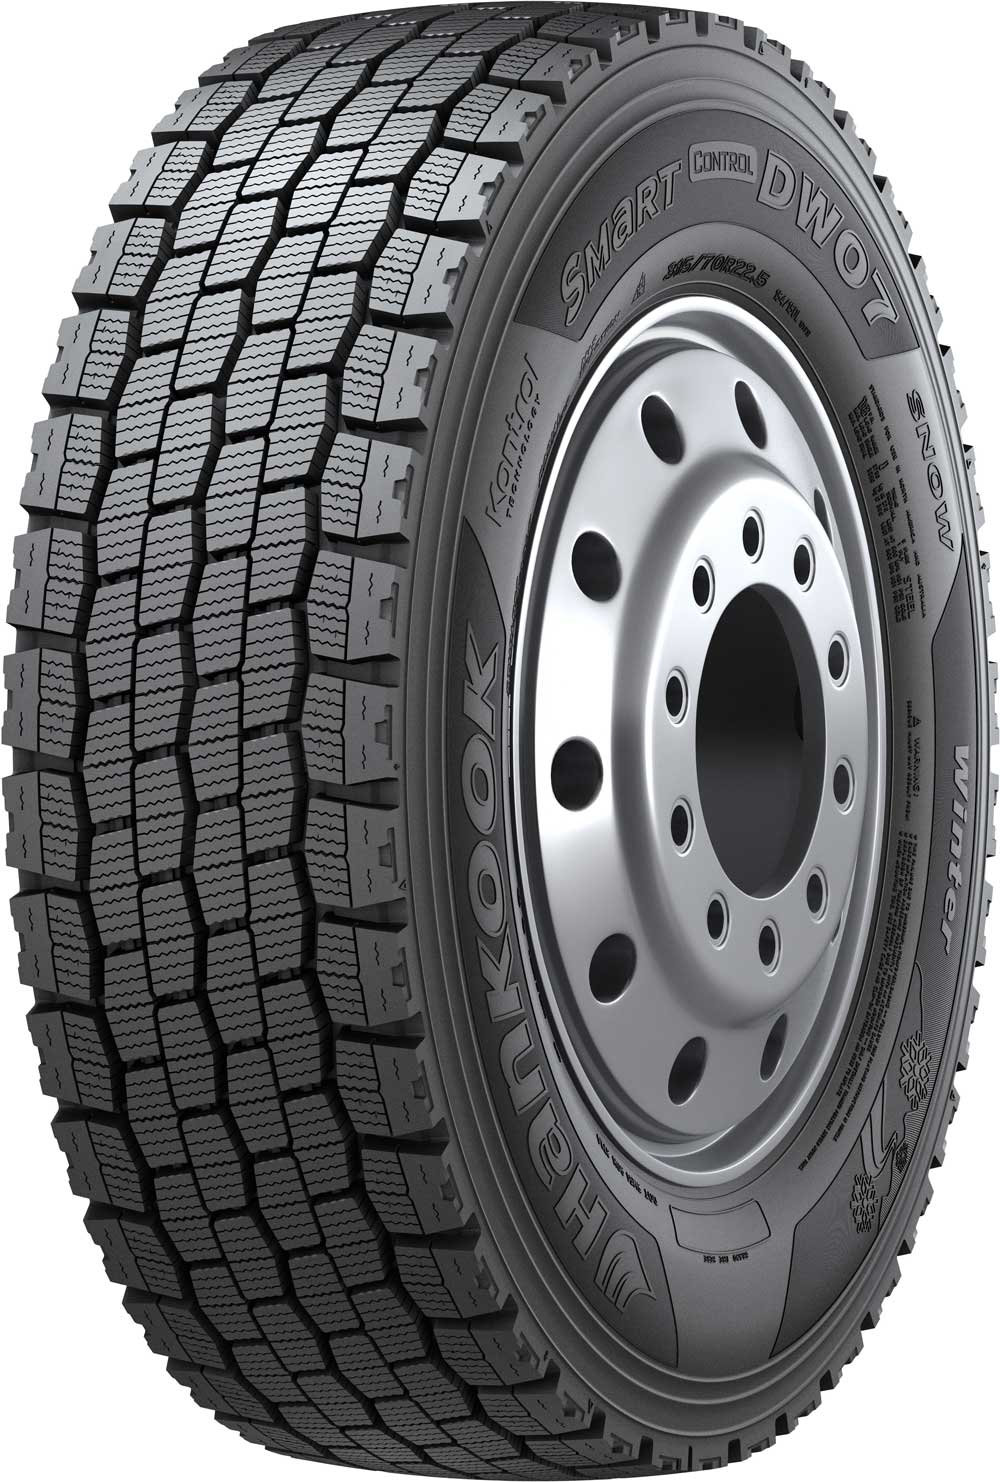 product_type-heavy_tires HANKOOK DW07 315/70 R22.5 154L